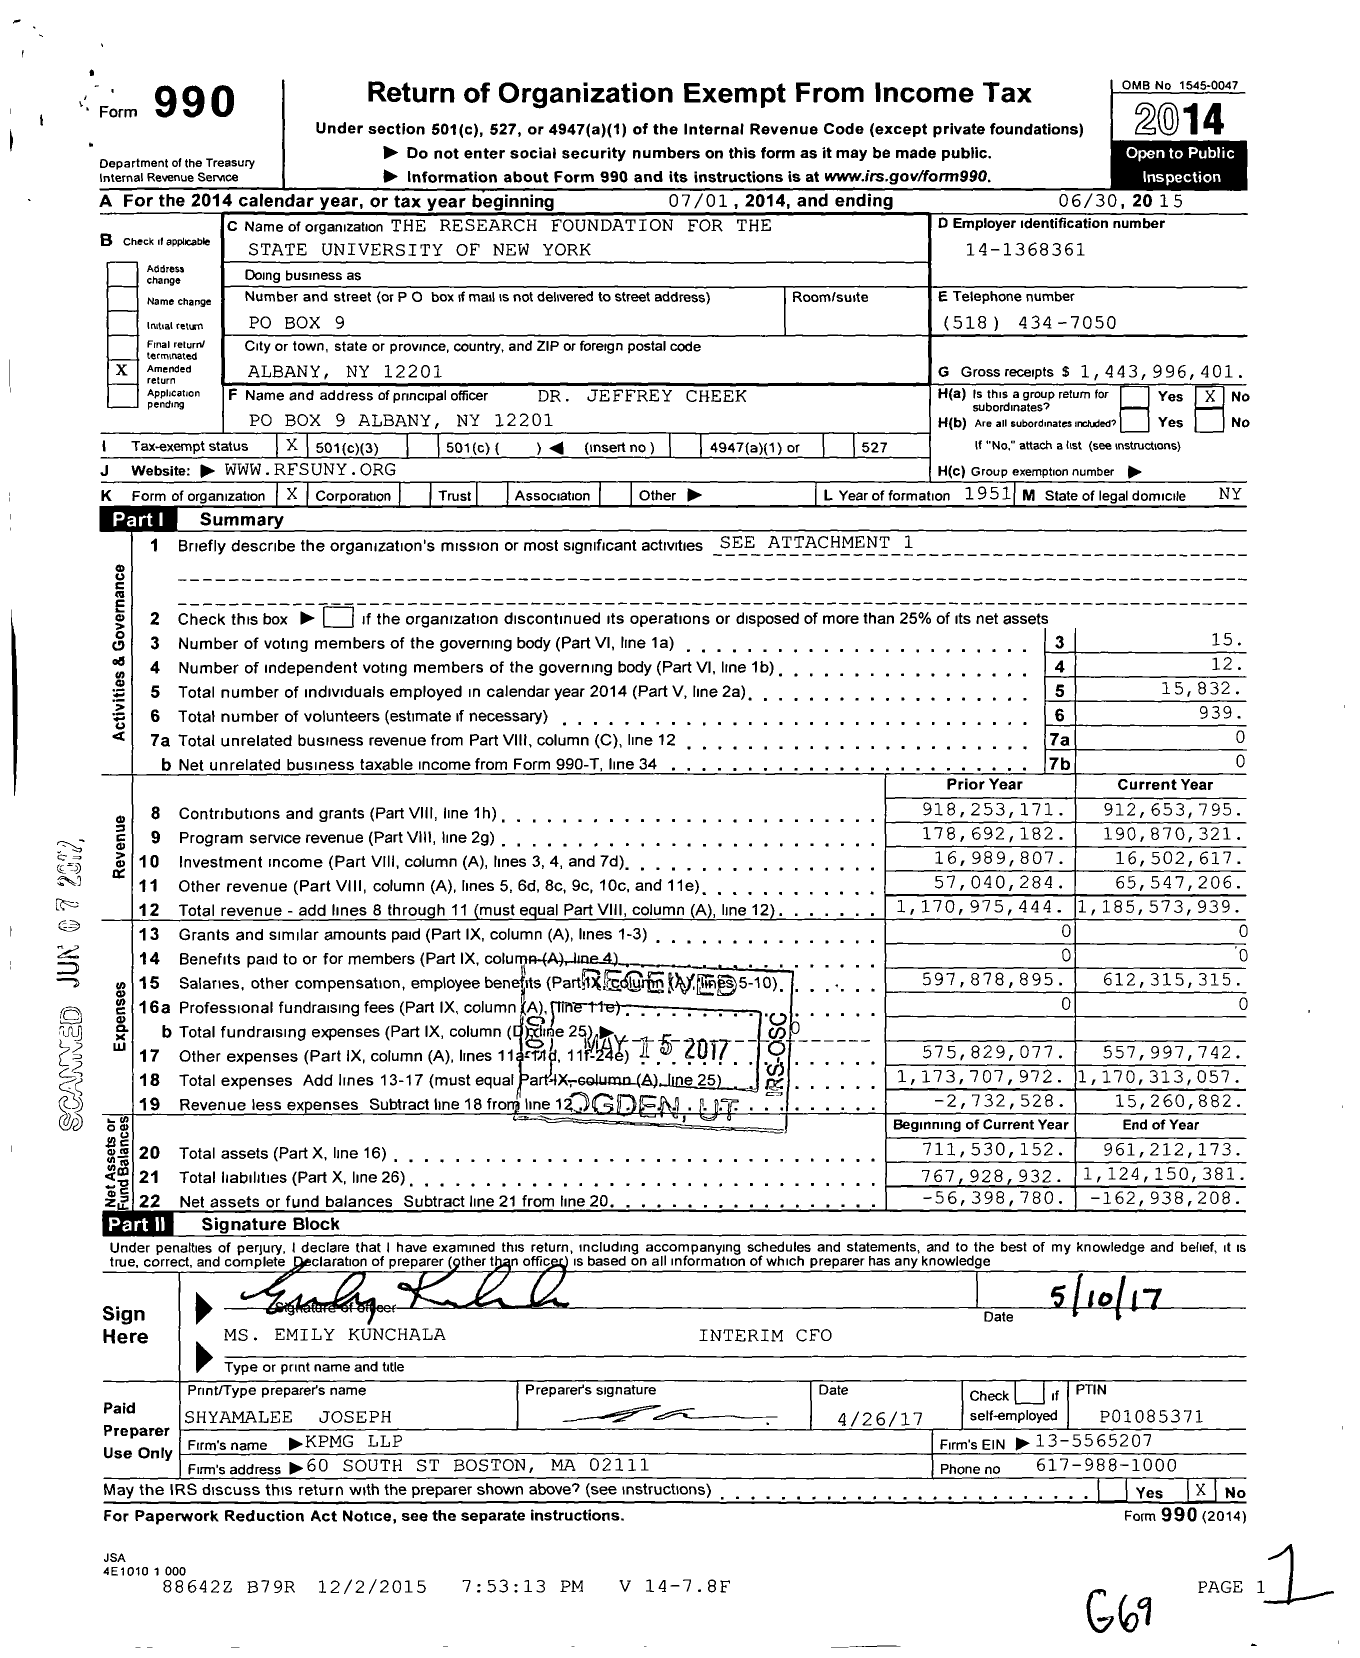 Image of first page of 2014 Form 990 for Research Foundation for the State University of New York (RFSUNY)